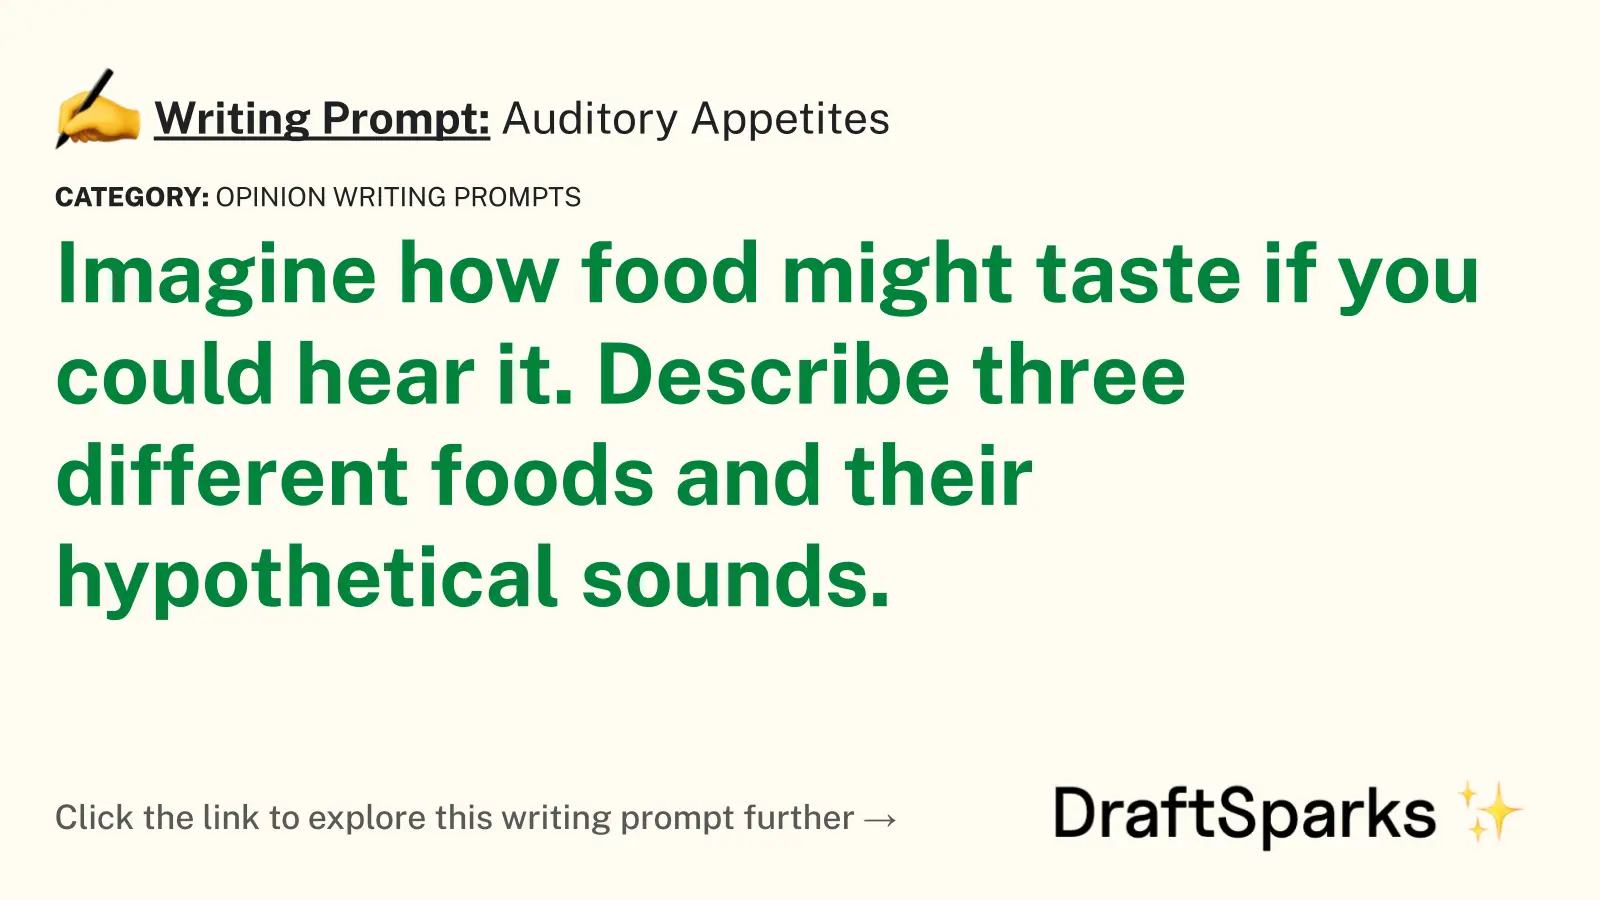 Auditory Appetites